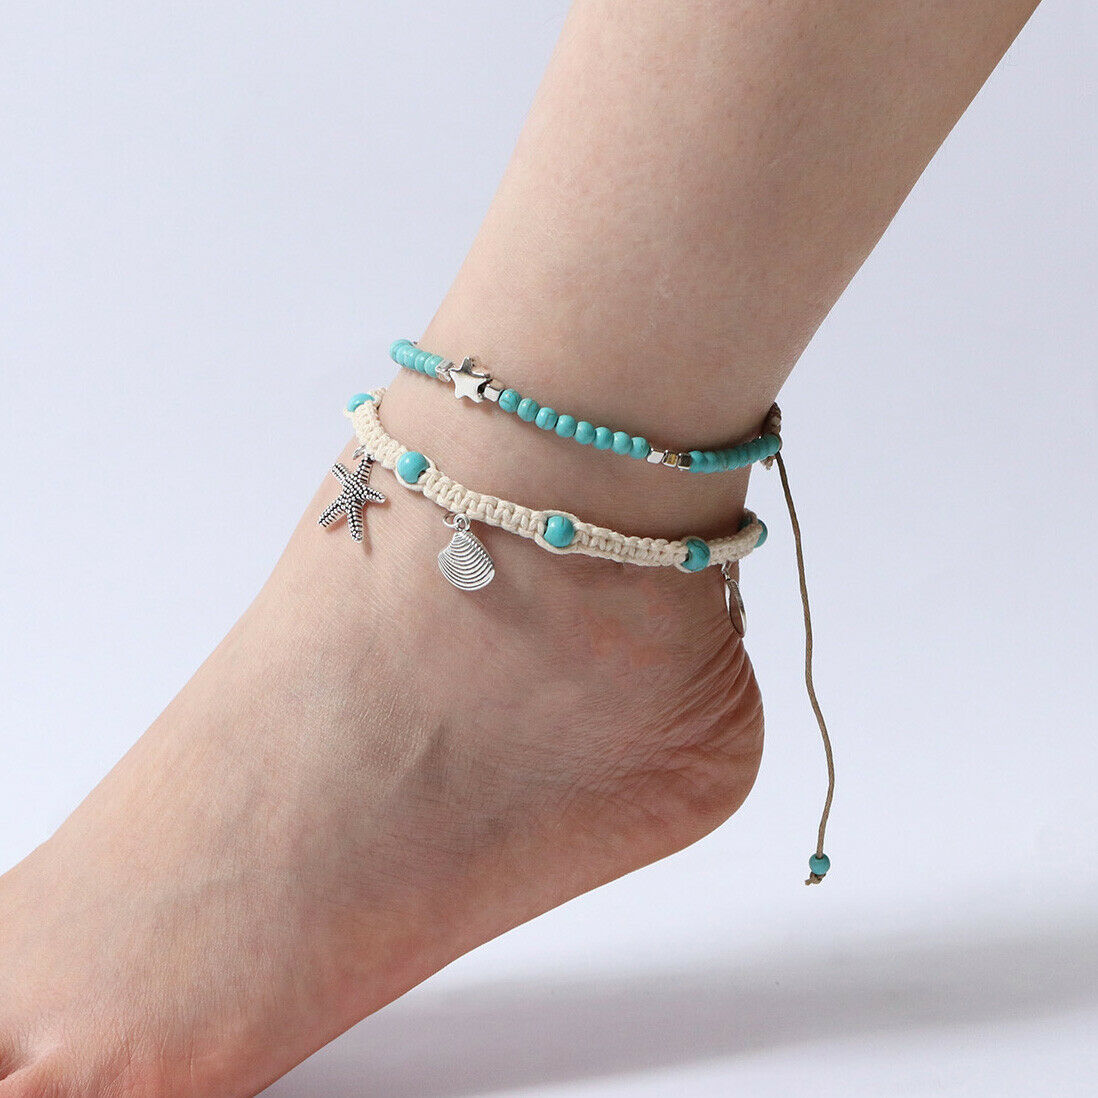 Fashion Lady's Boho Anklet Bracelet Charm Ankle Chain Foot Sandal Holiday Beach